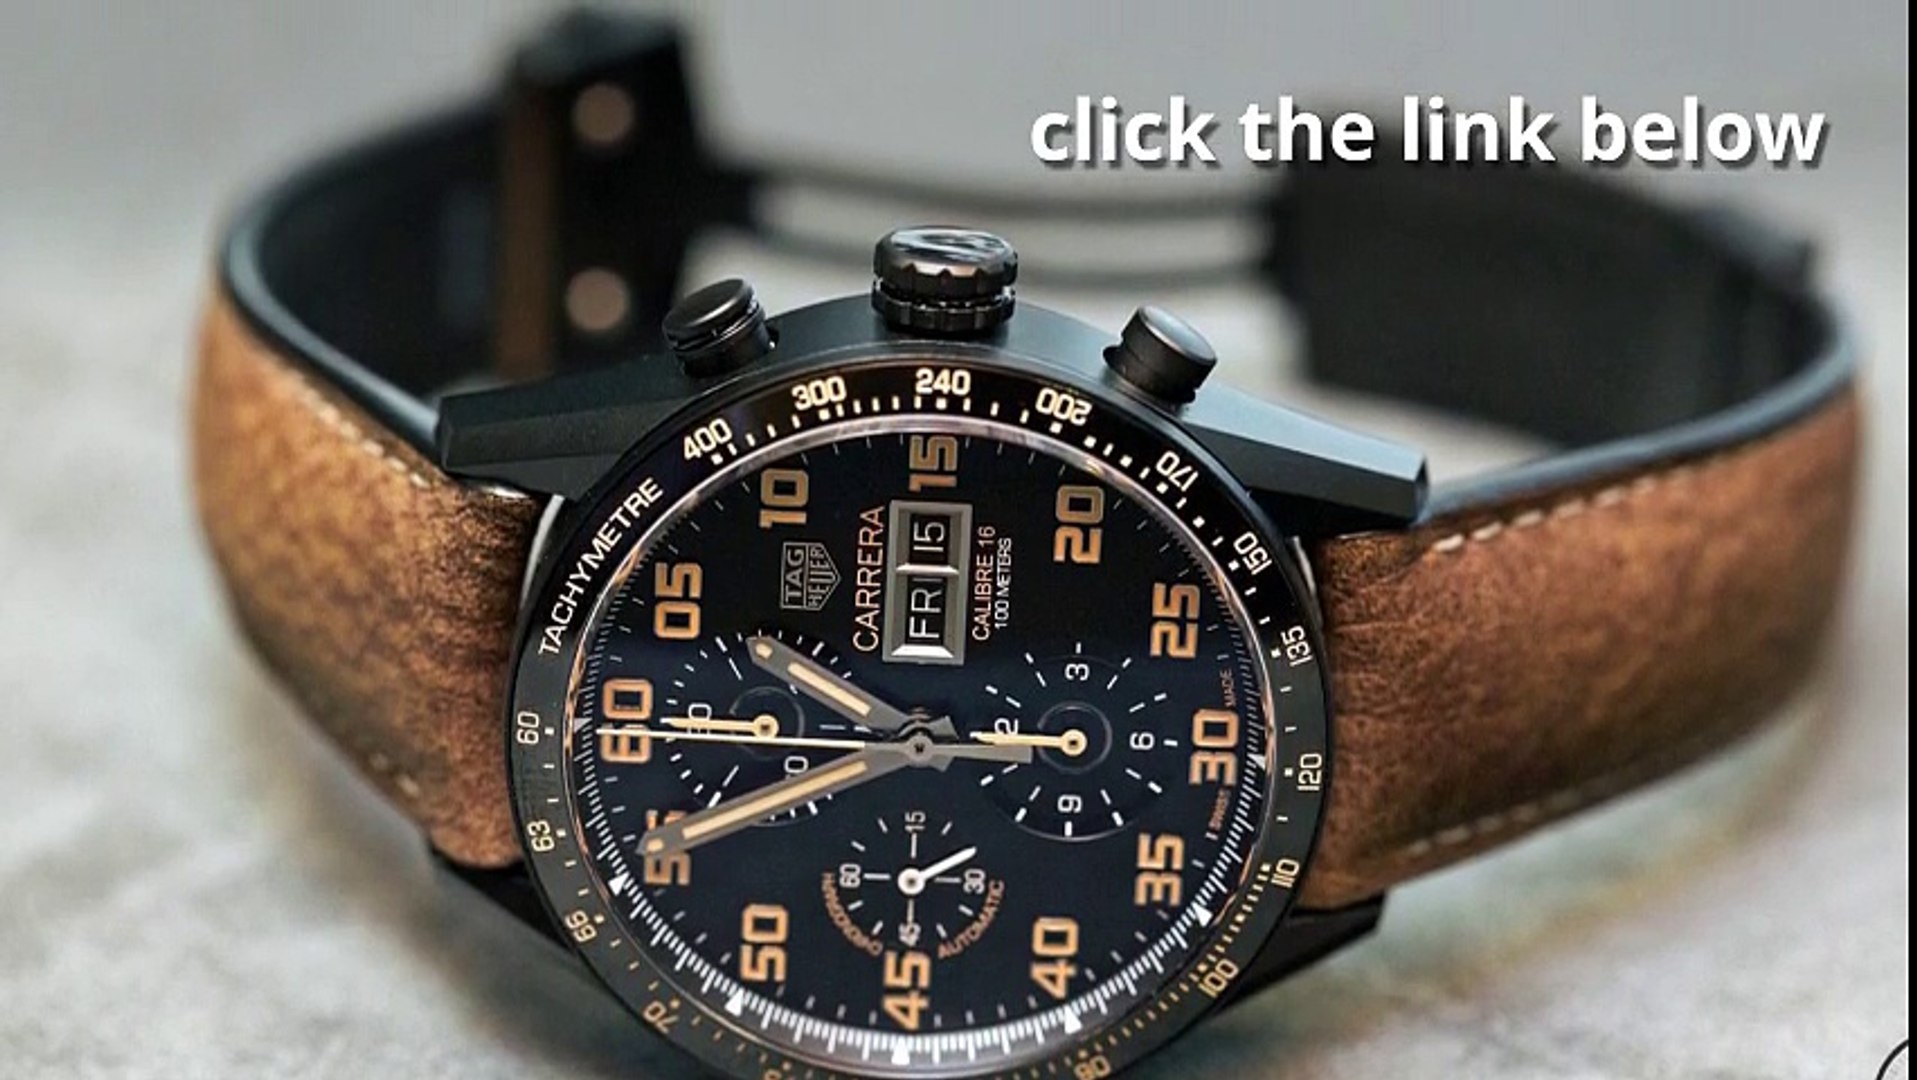 Best Tag Heuer Carrera Calibre 16 Price Egypt - video Dailymotion